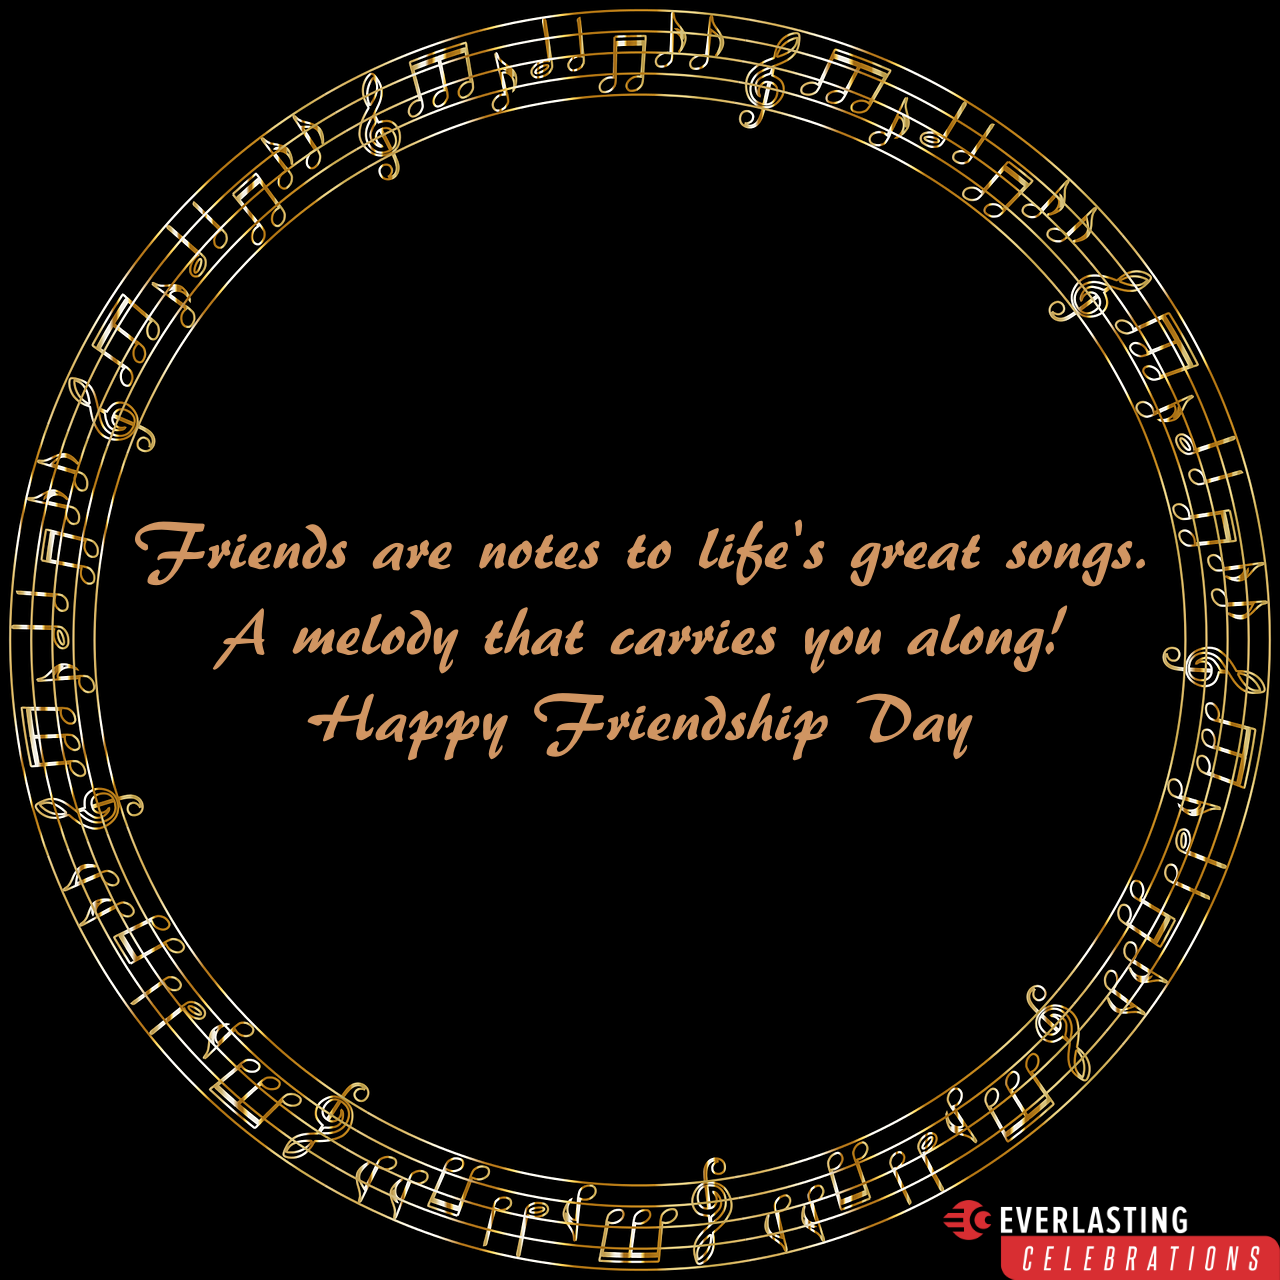 Friendship Day Hd Images - Happy Friendship Day Hd - HD Wallpaper 